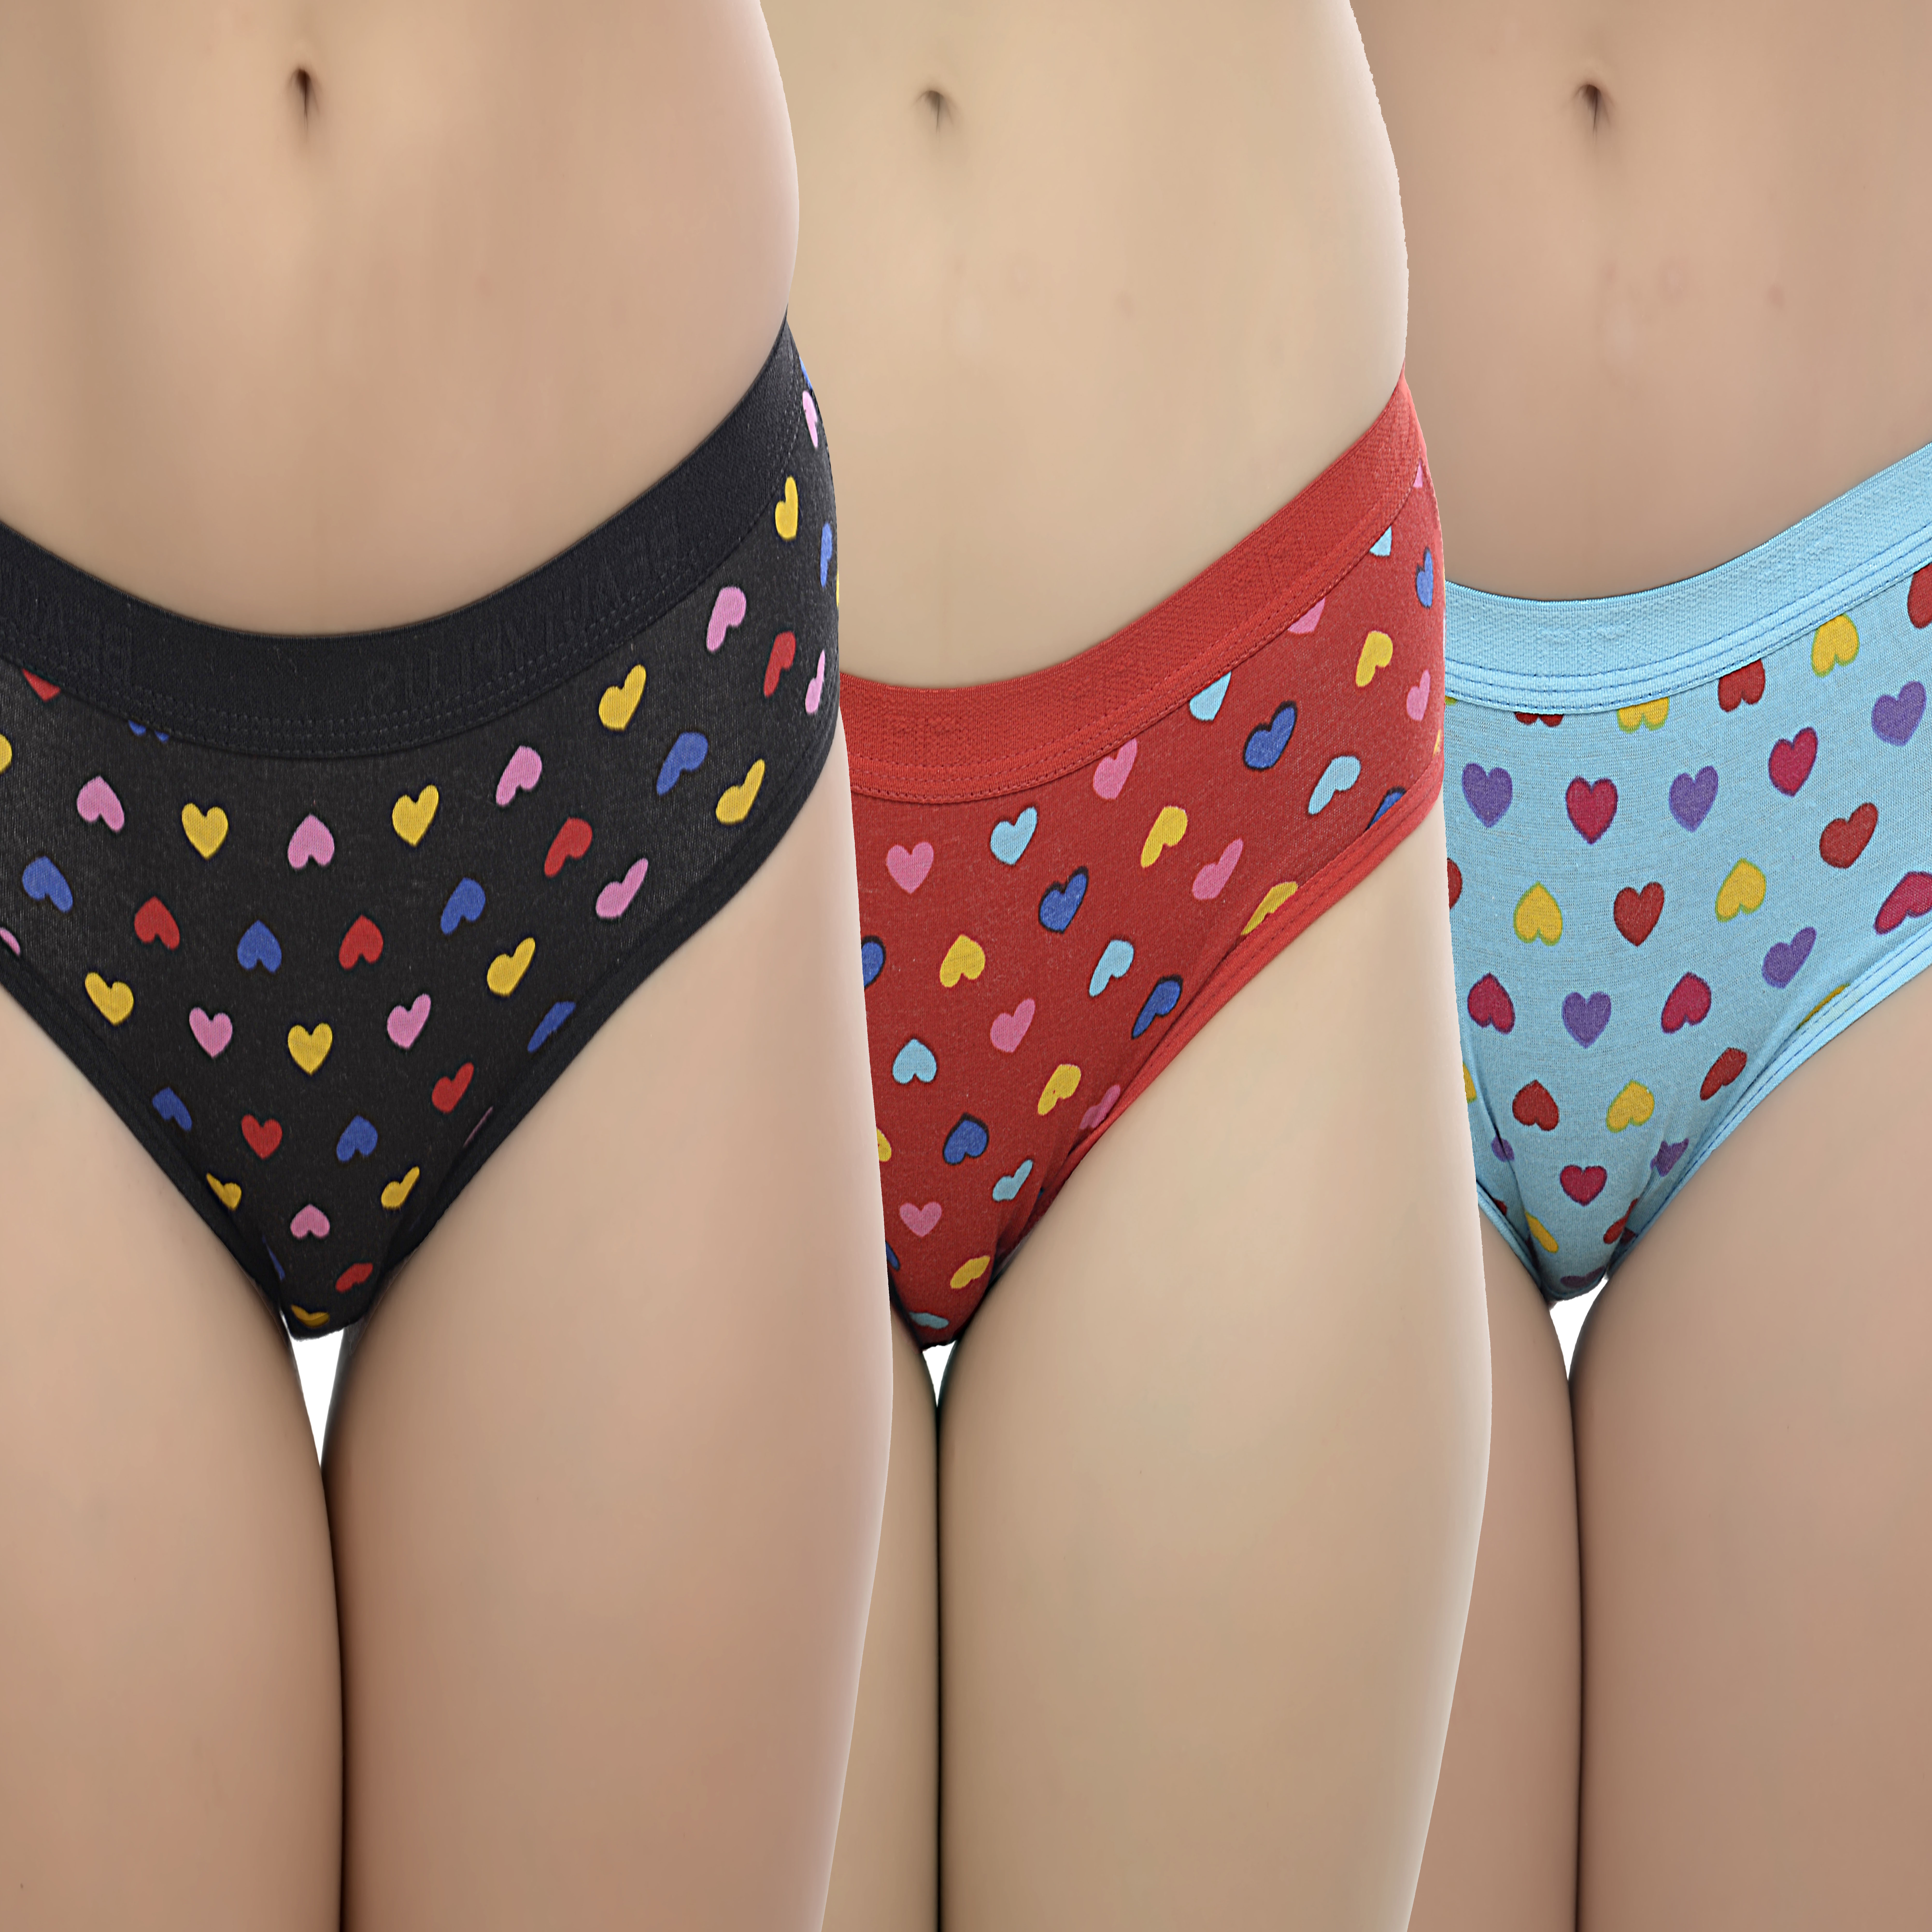 KAMMY FASHIONABLES | Kammy Fashionables Black, Red & Blue Colour Soft Cotton Printed Panties (Set of 3 Panties)